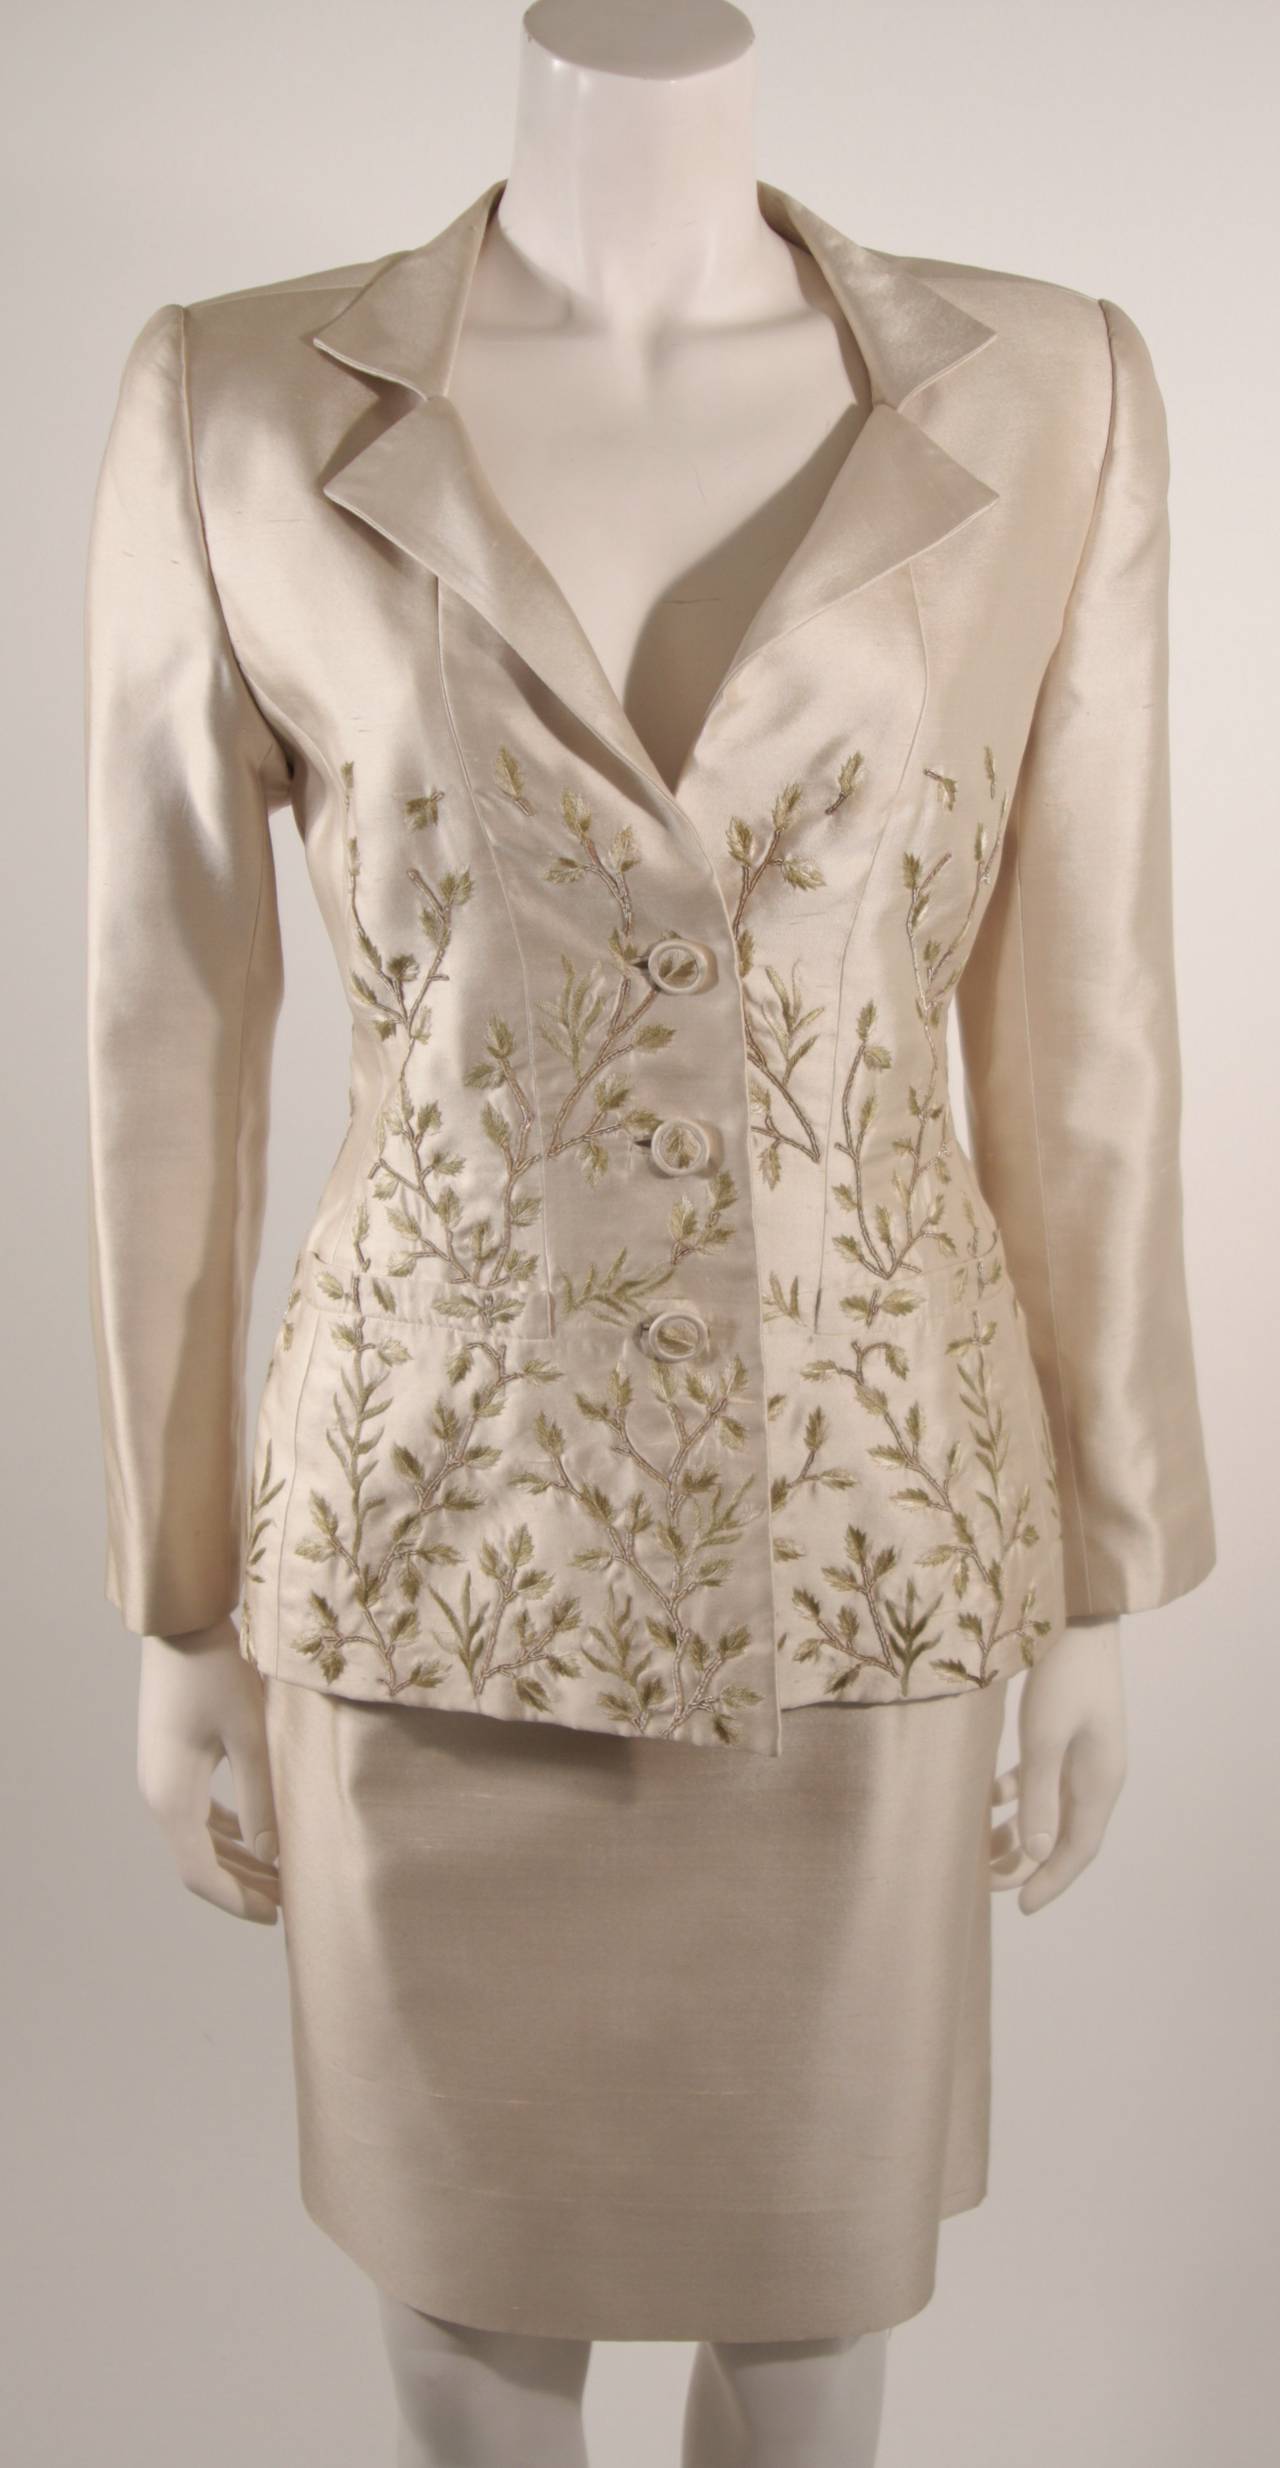 This is a stunning Oscar De La Renta skirt suit. The suit is composed of a champagne hued silk with sage leaf and branch embroidery. The jacket has center front button closures, and the skirt features a  zipper for ease of access. 

Measures